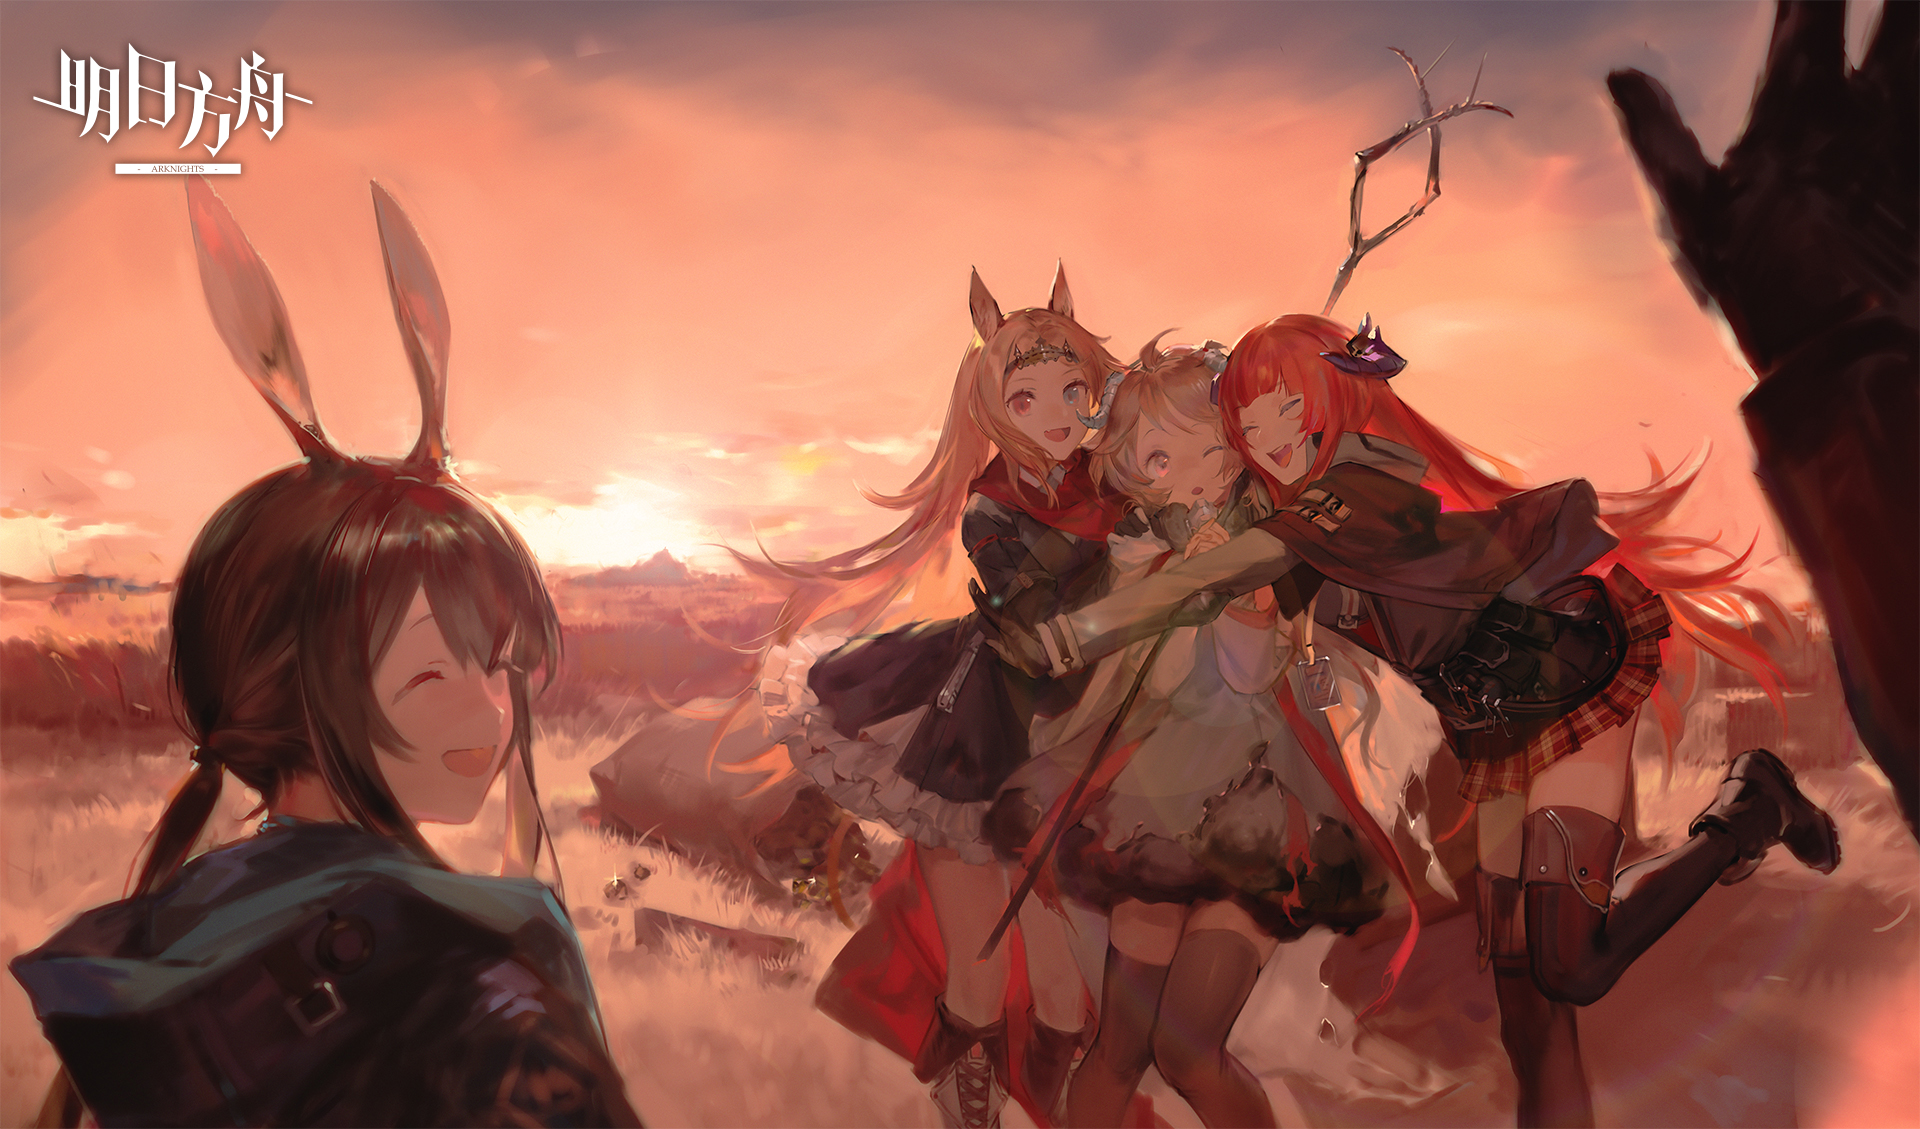 Anime 1920x1129 anime girls Arknights video game characters sunset SanMuYYB Amiya (Arknights) Archetto(Arknights) Bagpipe(Arknights) Eyjafjalla(Arknights) POV